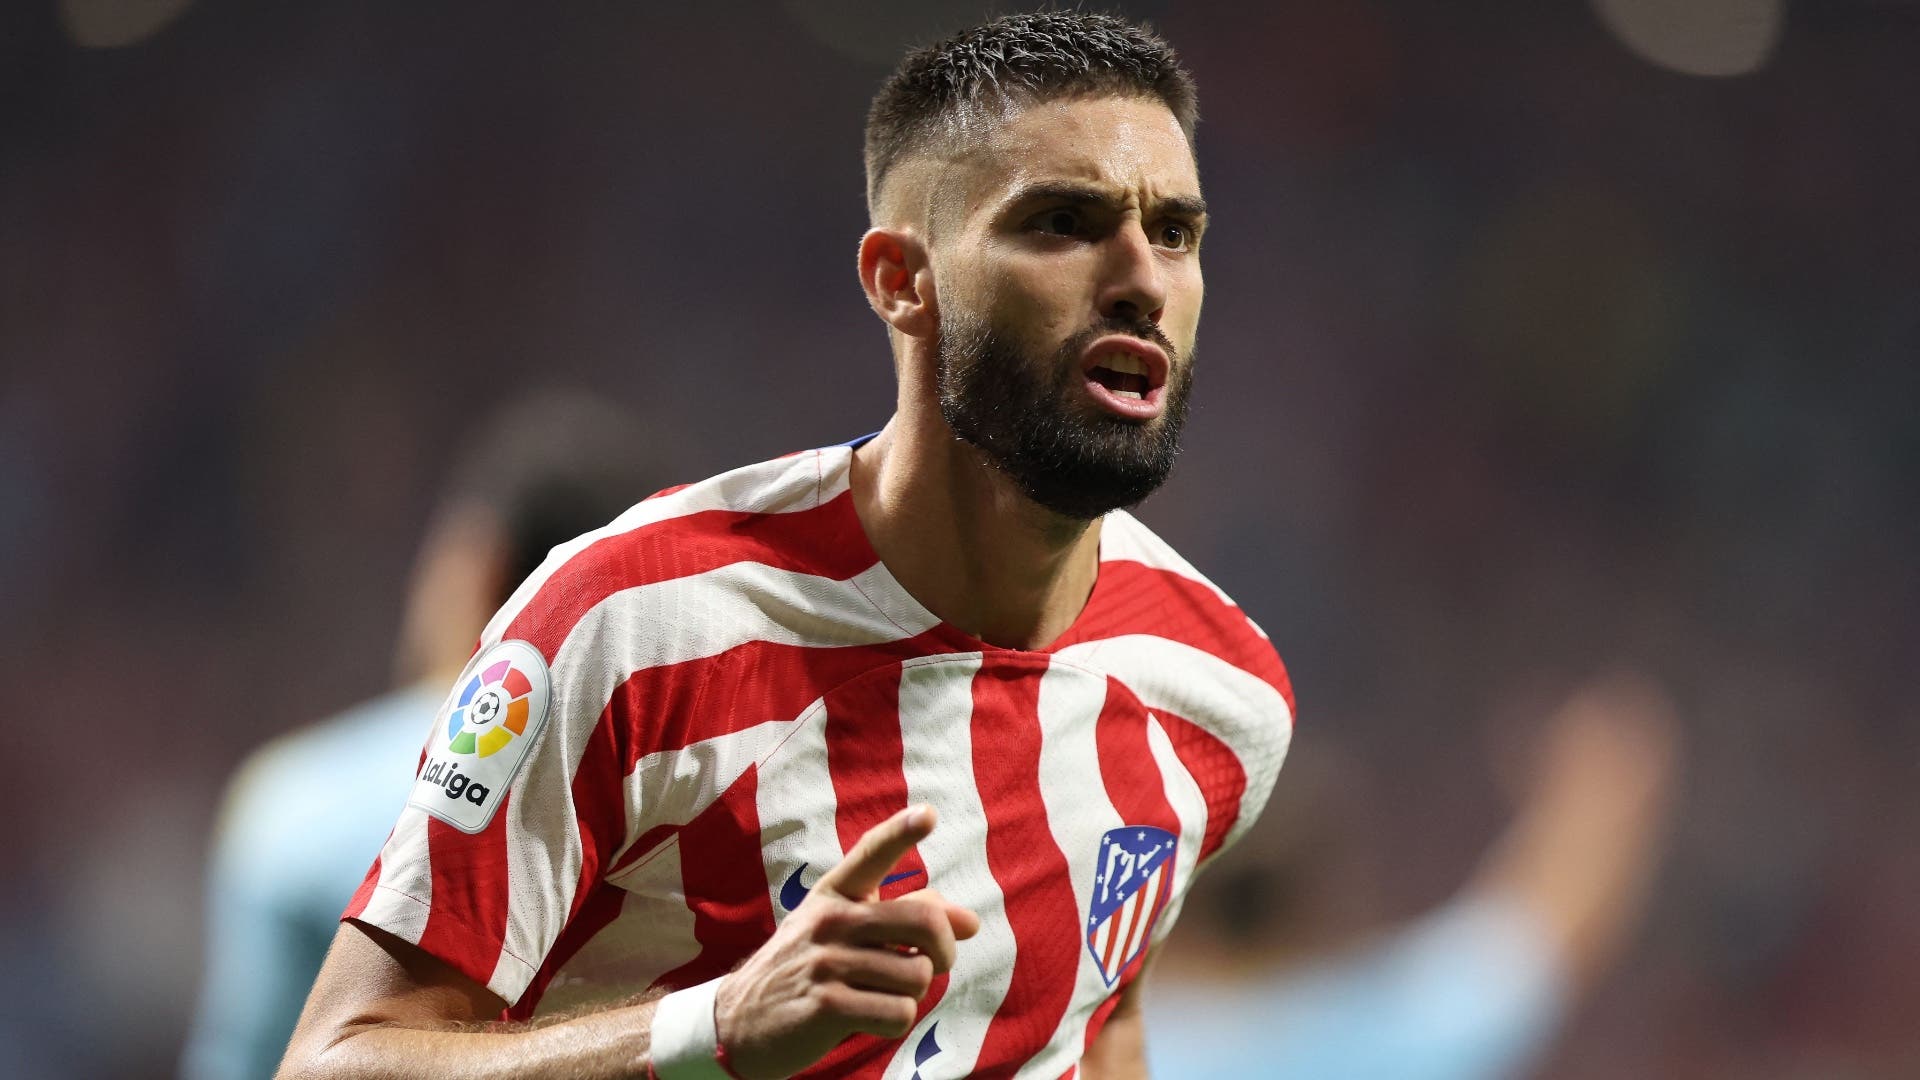 Carrasco forces Atlético to close a pre-agreement for a new winger with dangerous compensation
